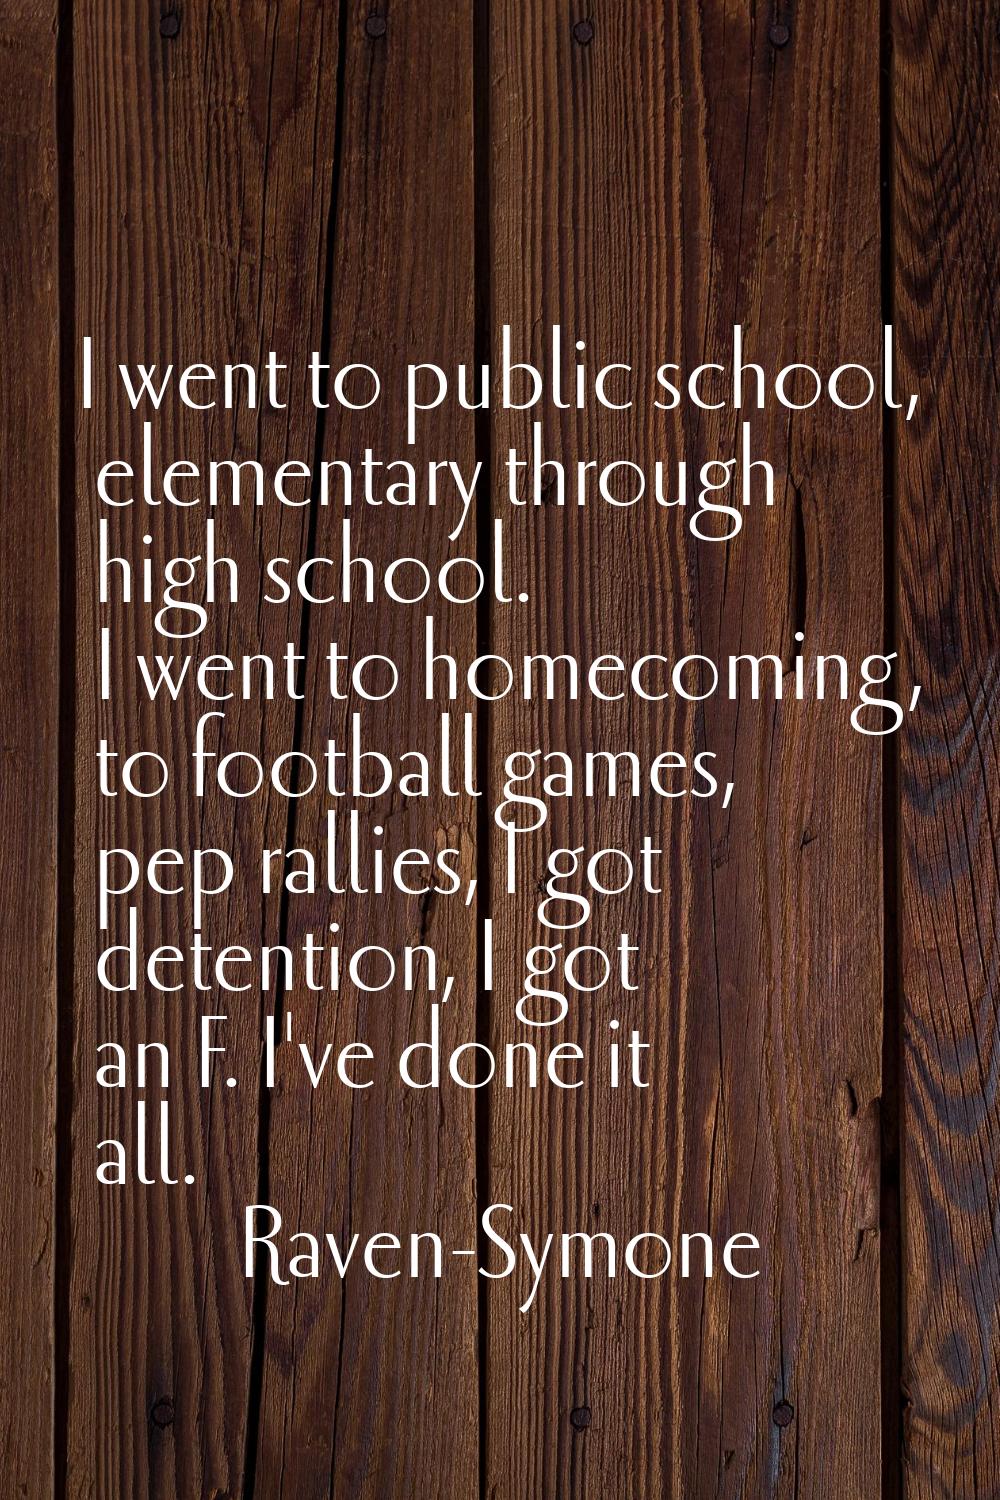 I went to public school, elementary through high school. I went to homecoming, to football games, p